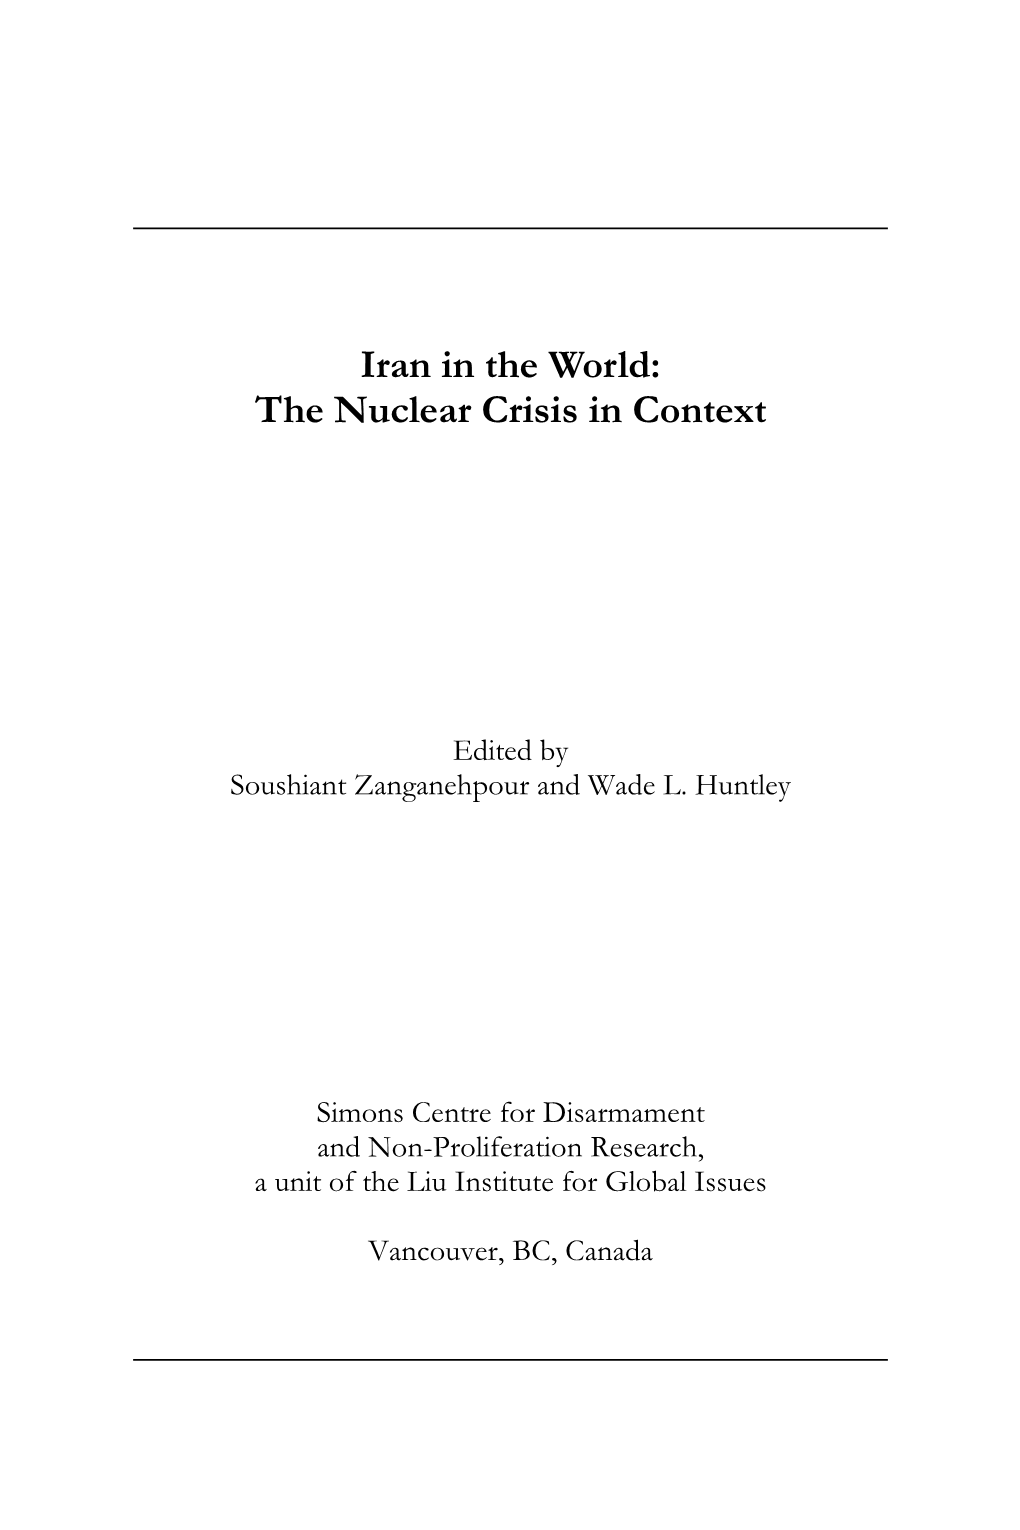 Iran in the World: the Nuclear Crisis in Context